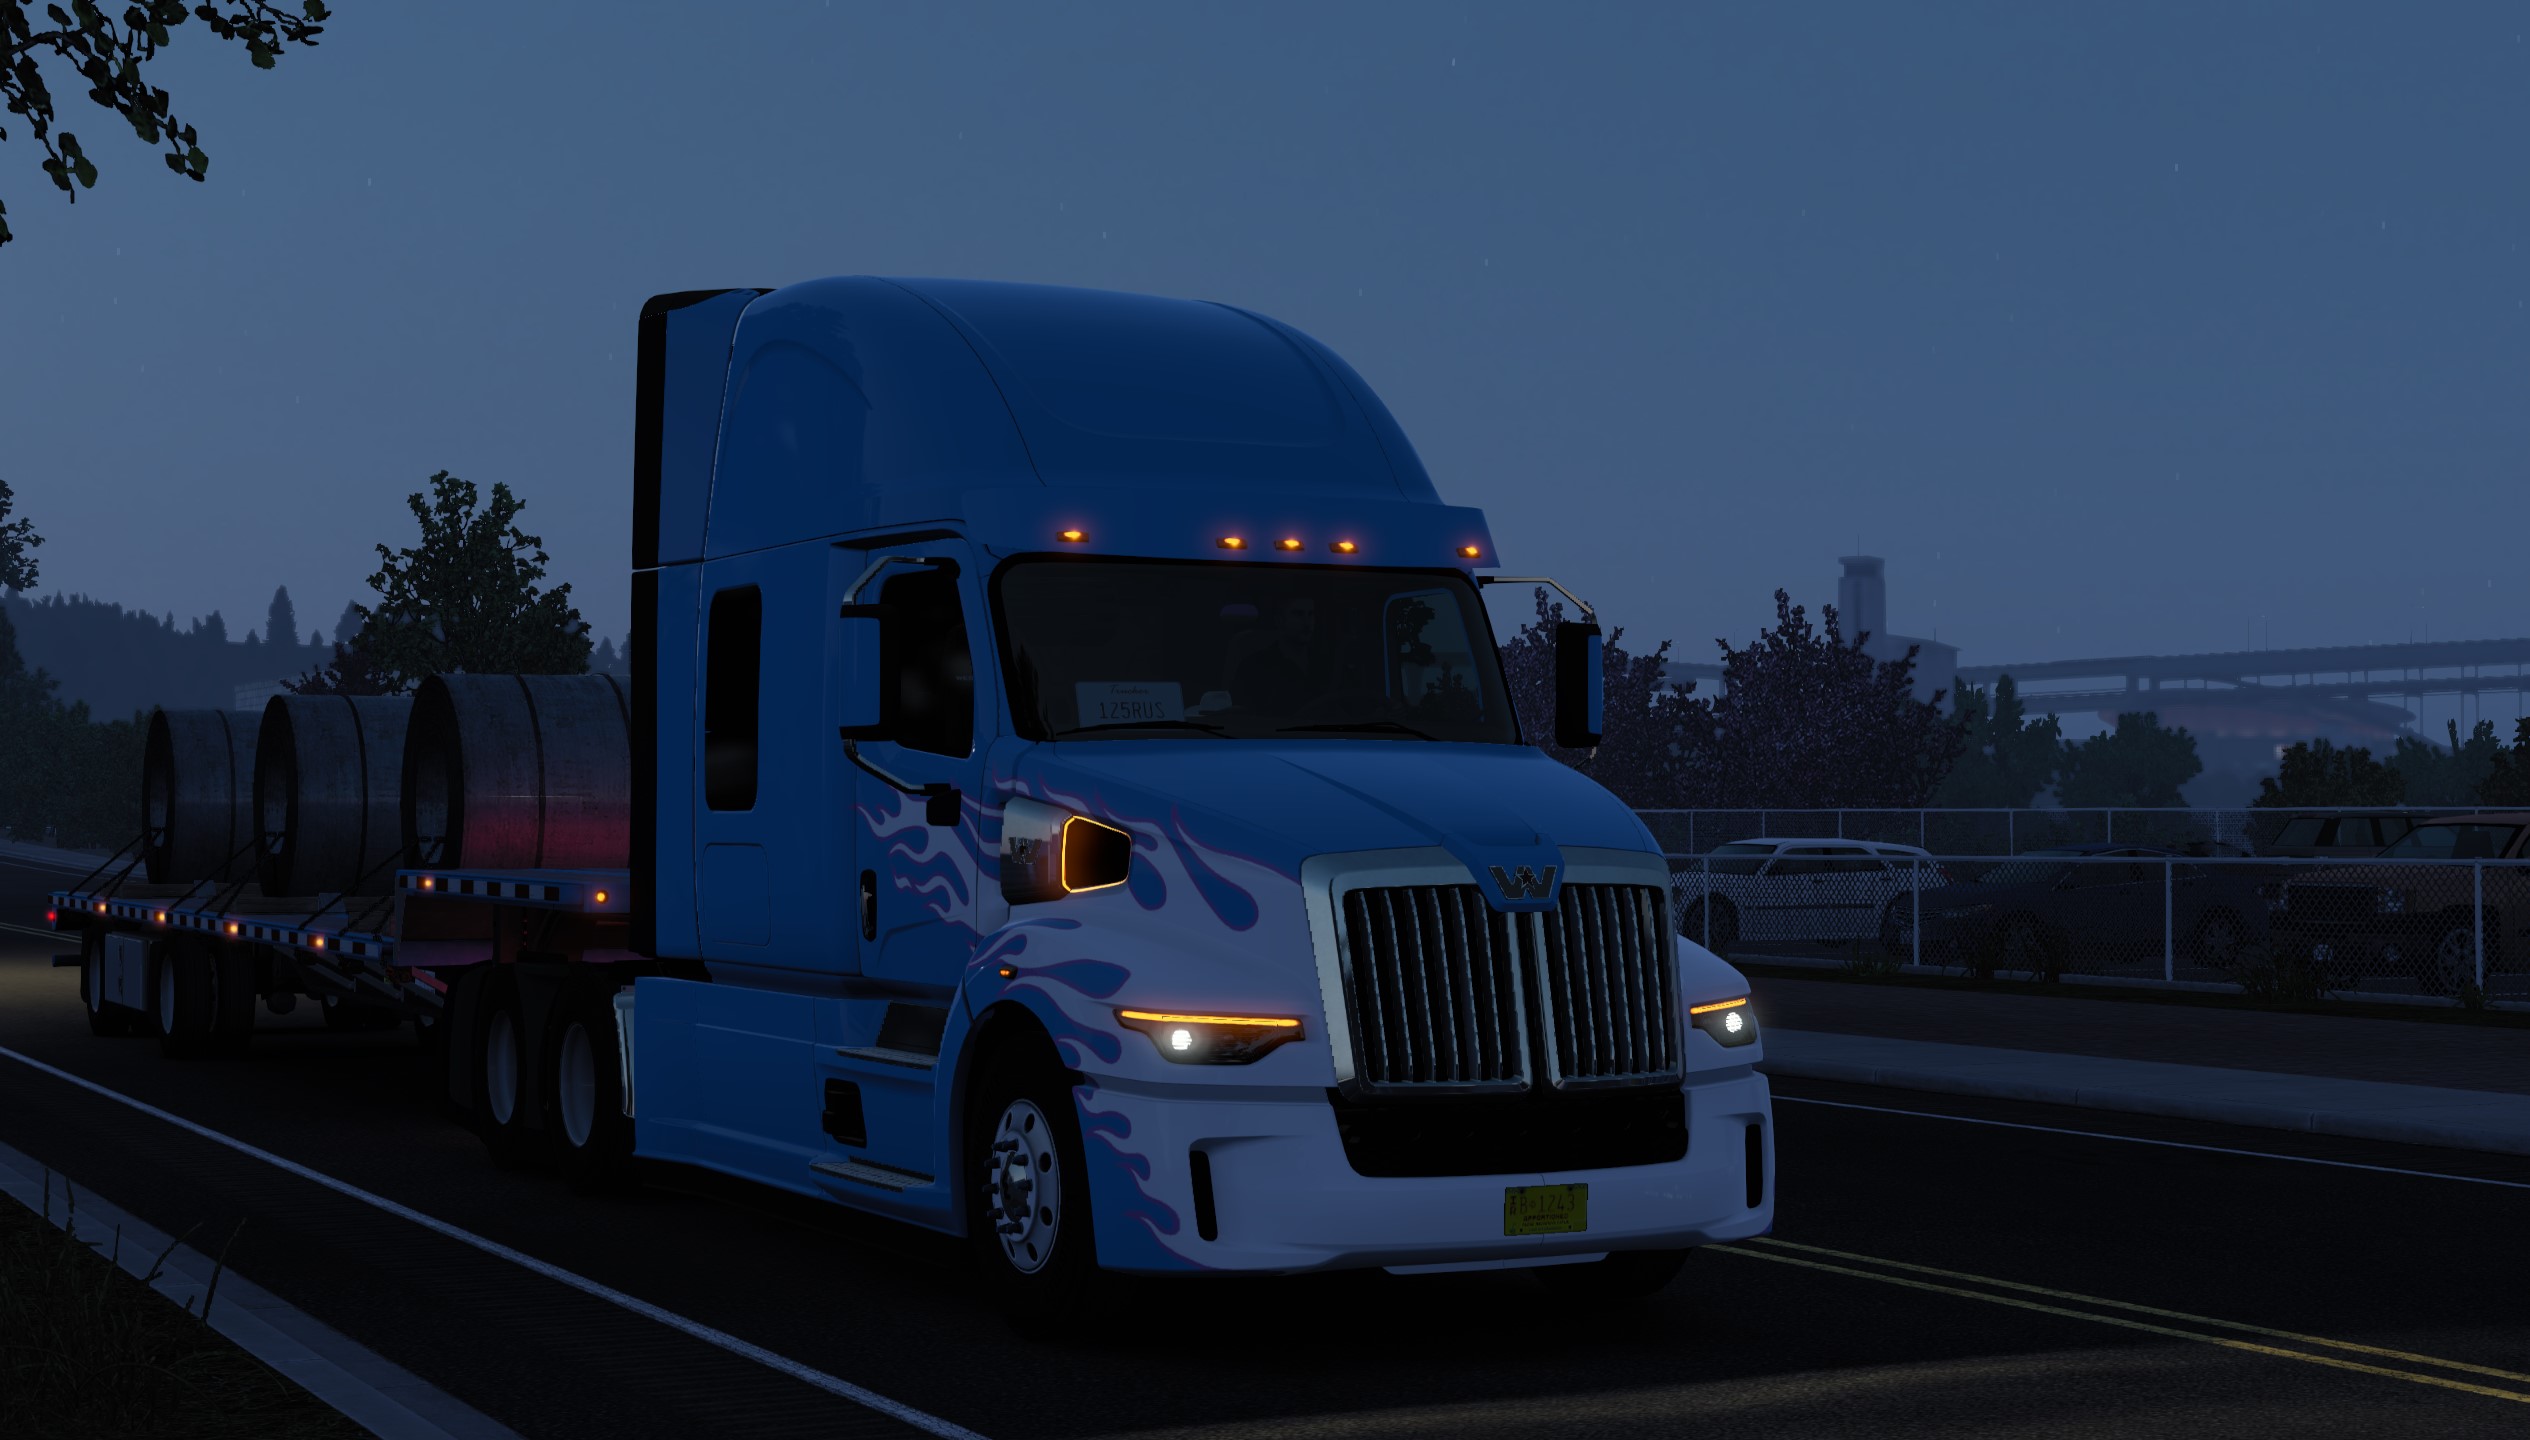 Euro Truck Simulator 2 - Enable Cruise Control - Add me to friends! - B06C64C